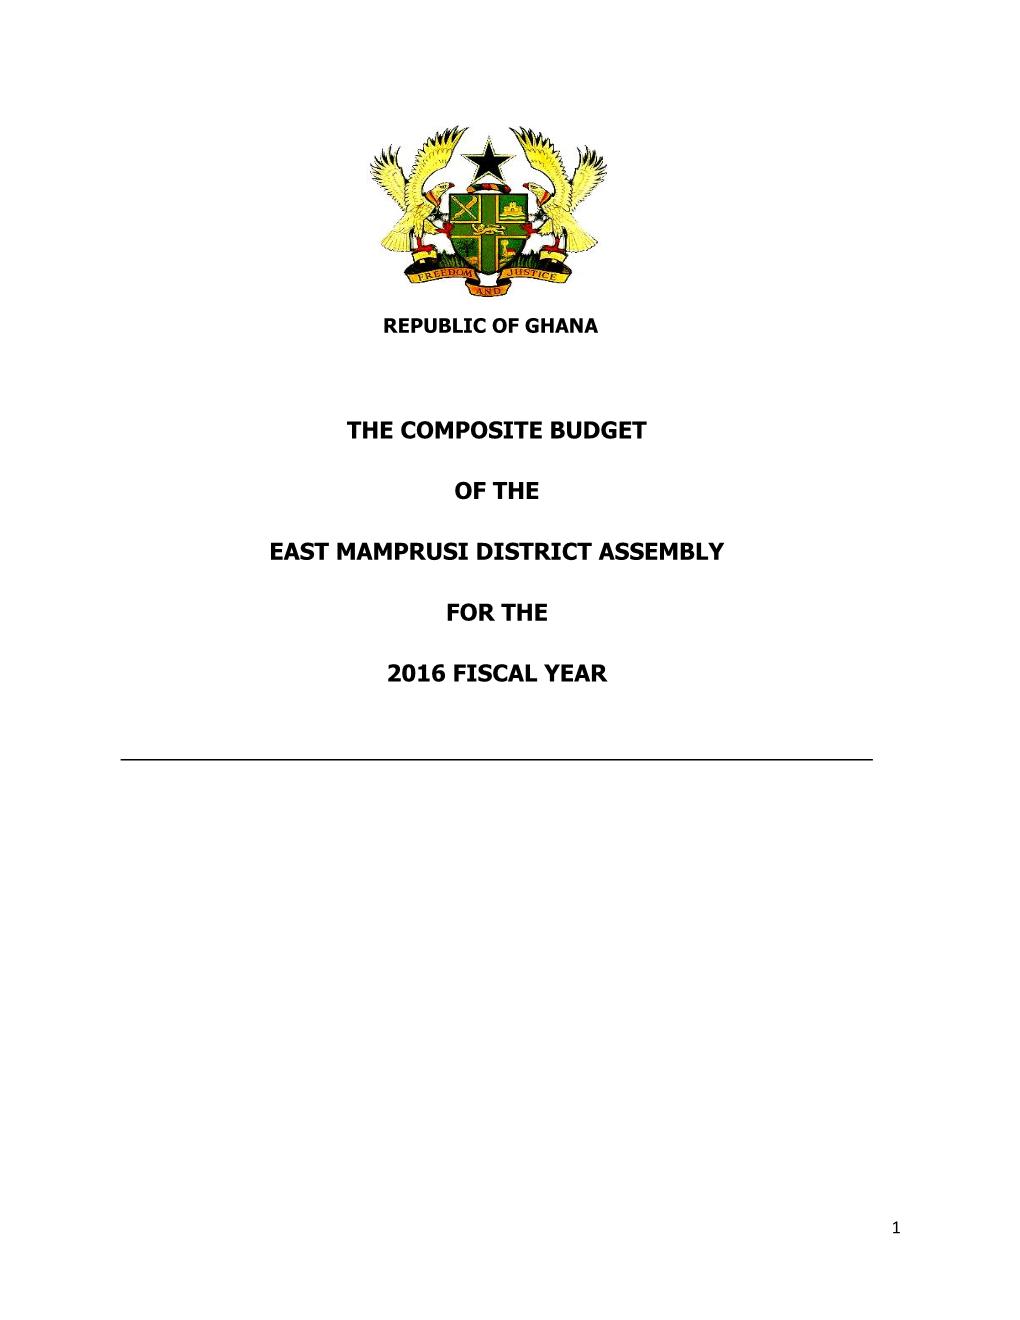 The Composite Budget of the East Mamprusi District